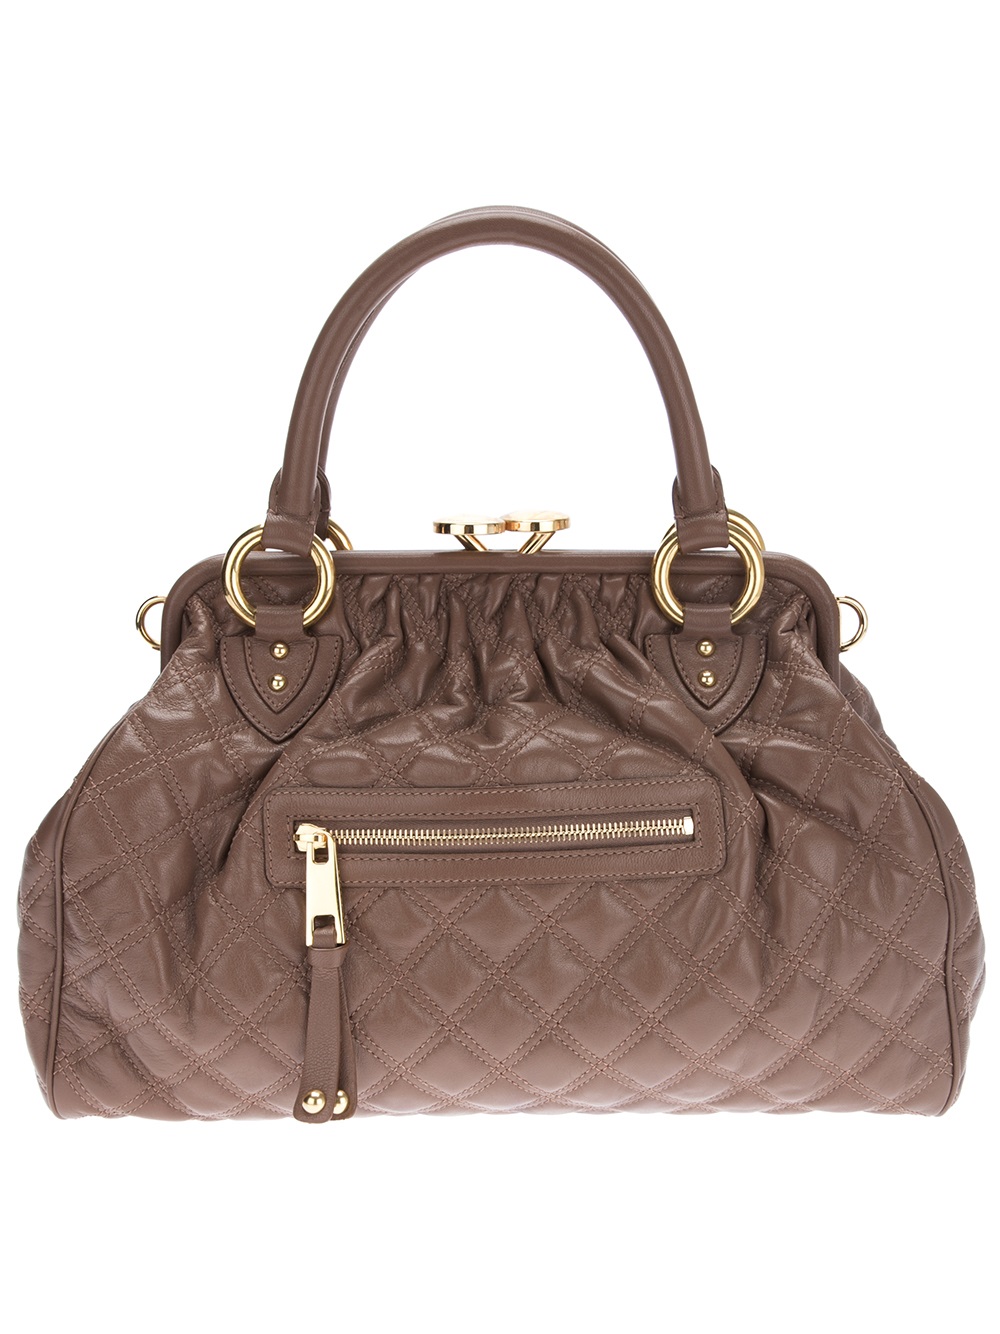 Marc Jacobs Stam Quilted Tote in Brown - Lyst